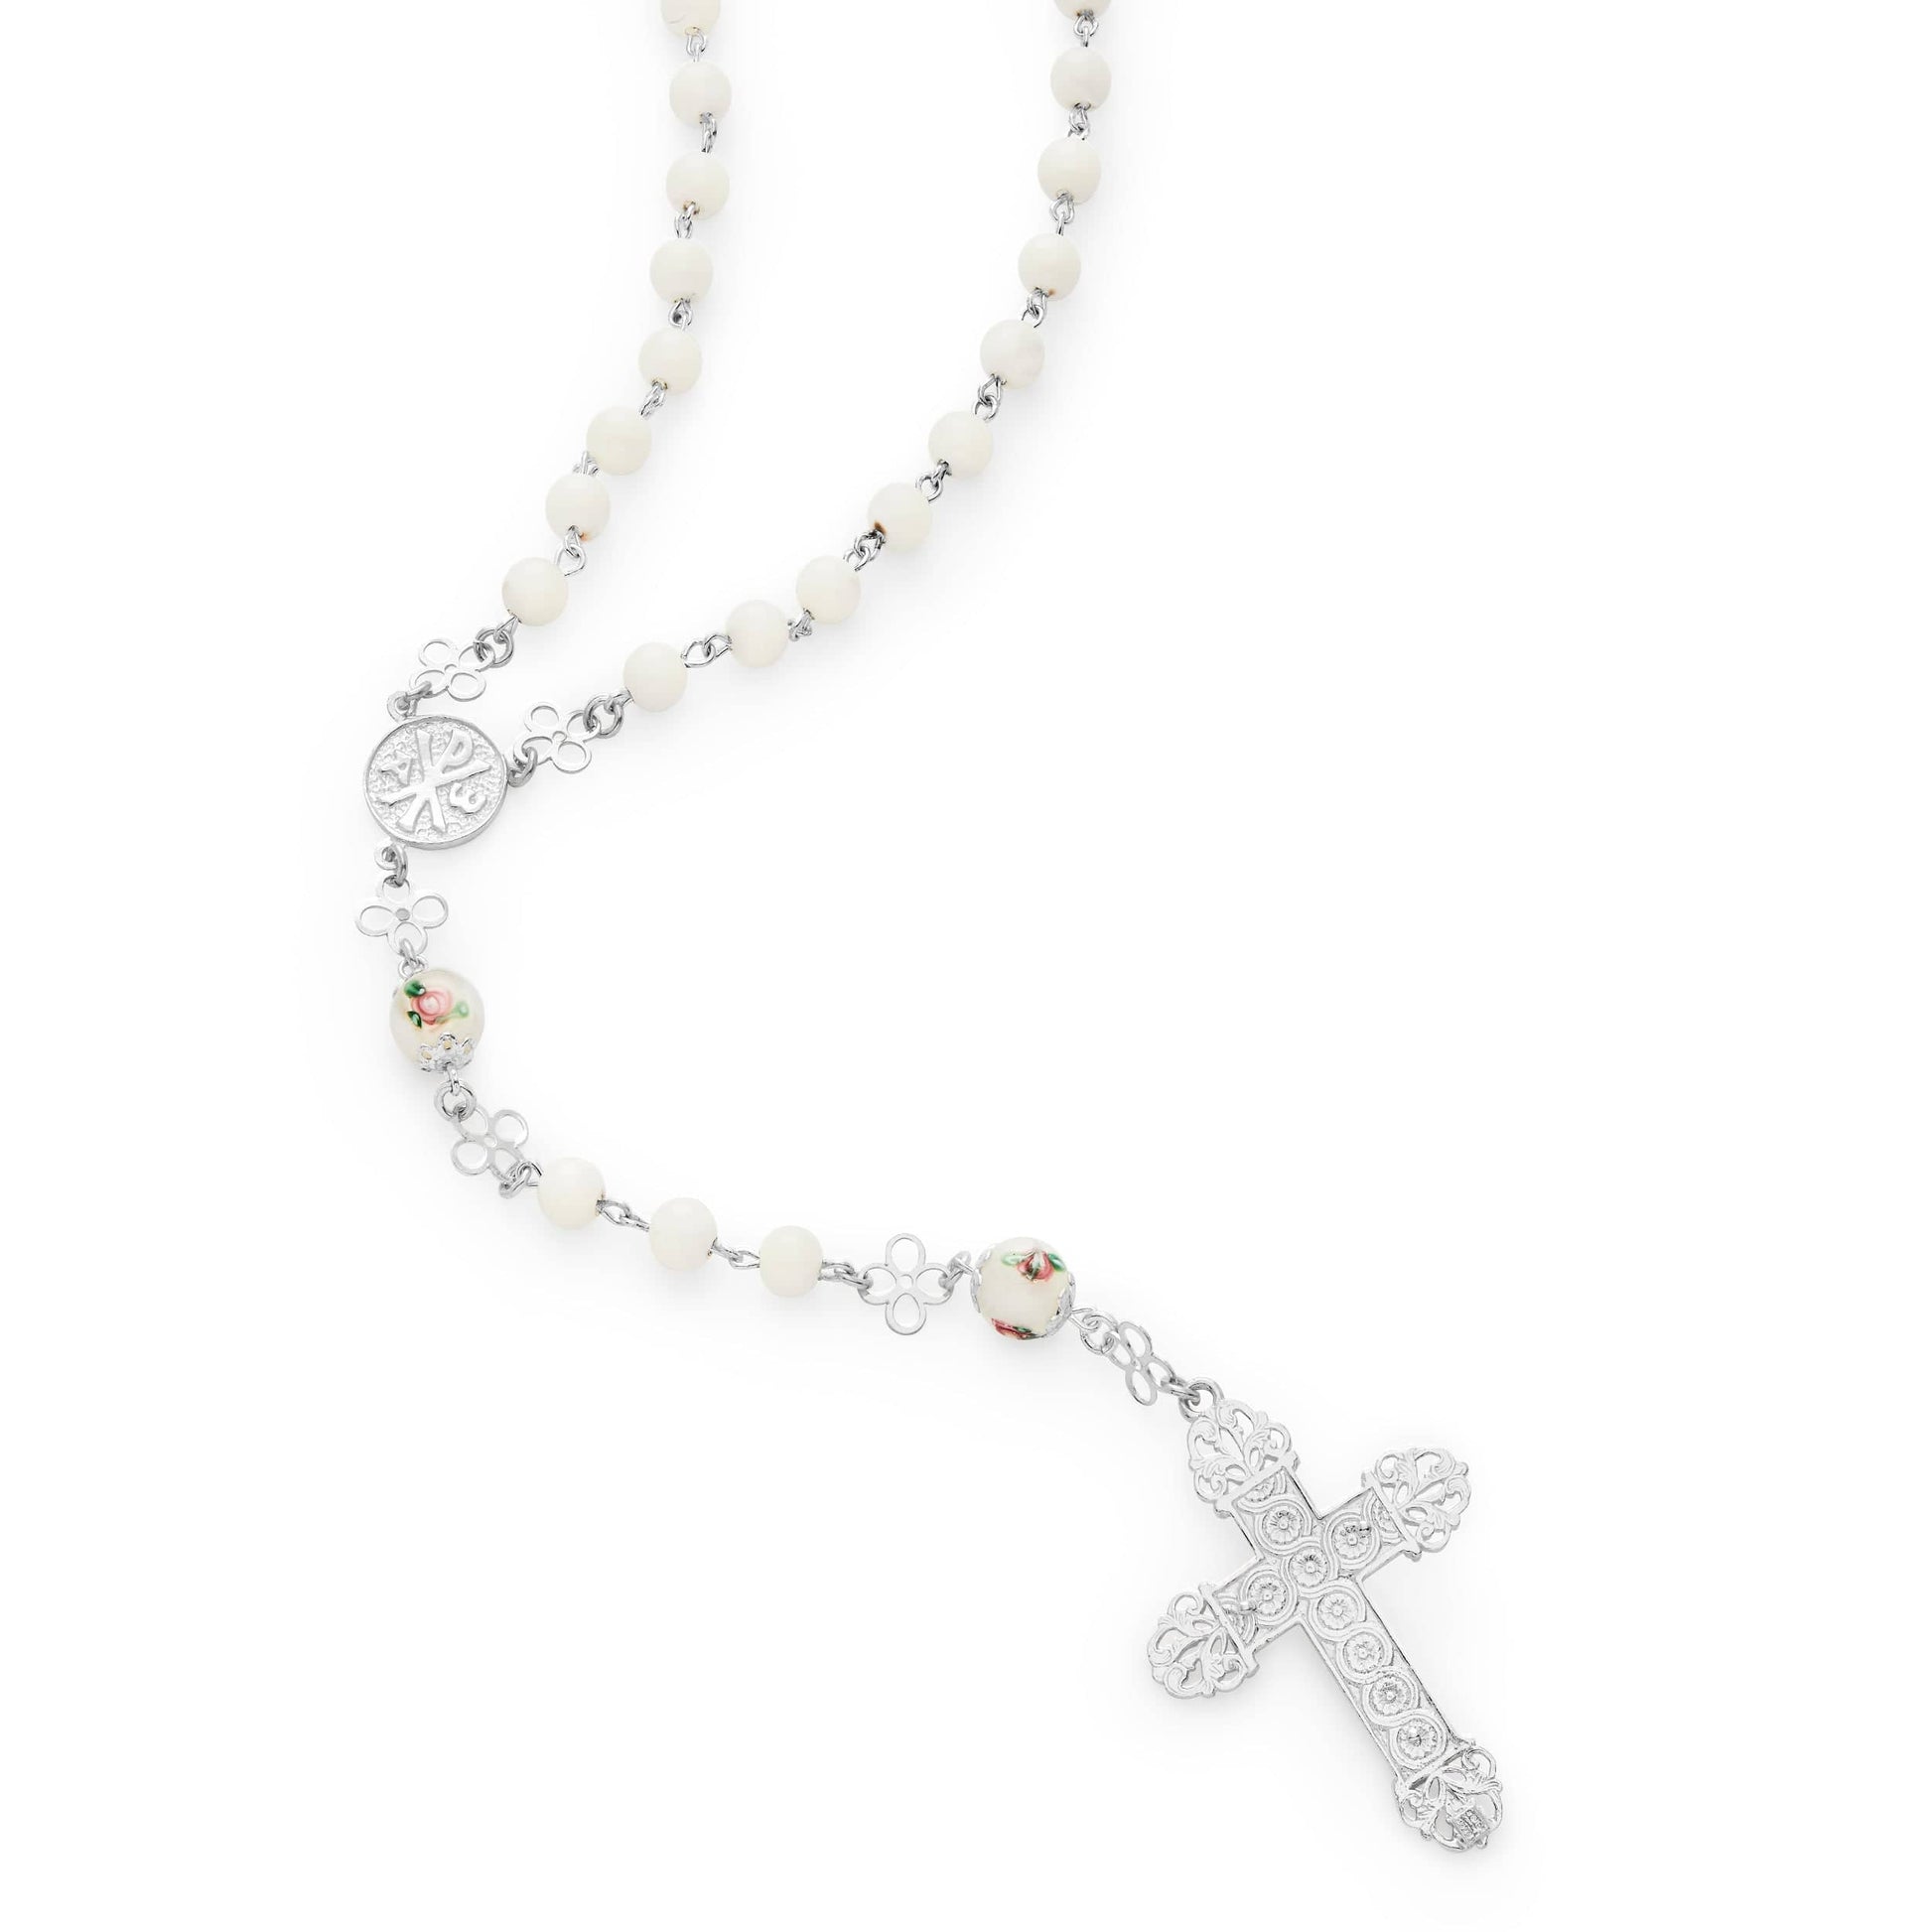 MONDO CATTOLICO Prayer Beads 51 Cm (20.07 in) / 6 mm (0.23 in) Mother of Pearl Sterling Silver Rosary